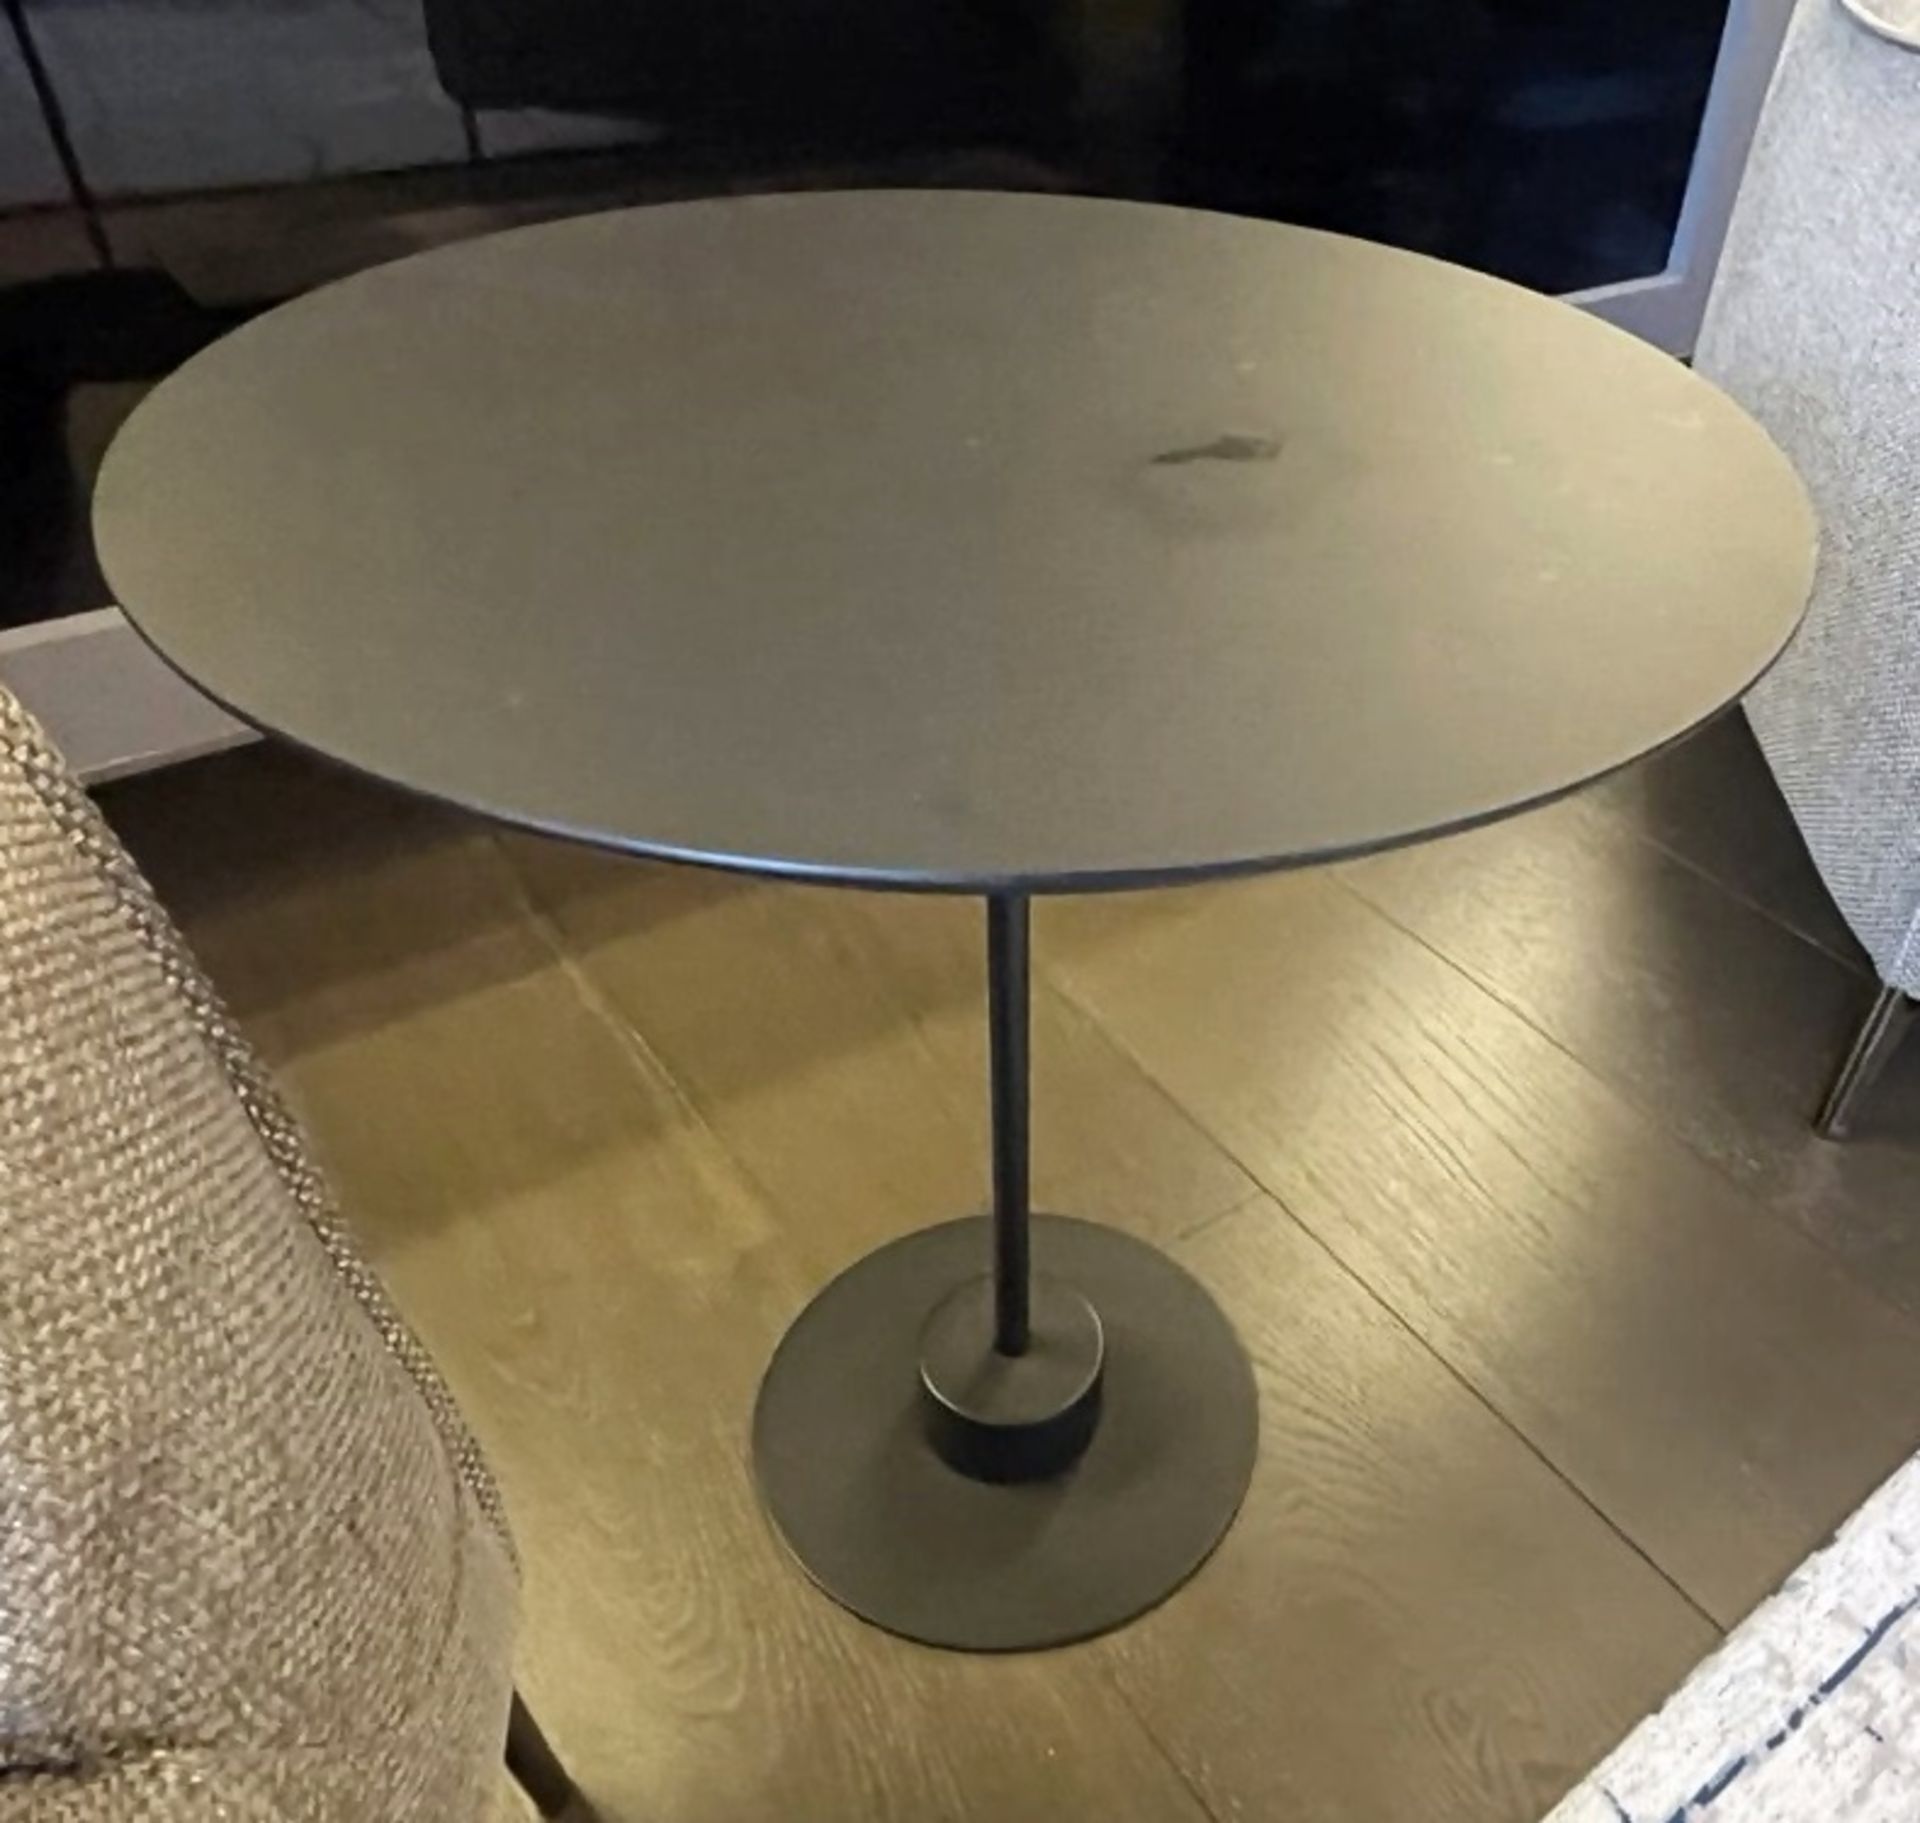 1 x Stylish Round Occasional Metal Table with a Bronzed Finish and Industrial Aesthetic - Image 3 of 4